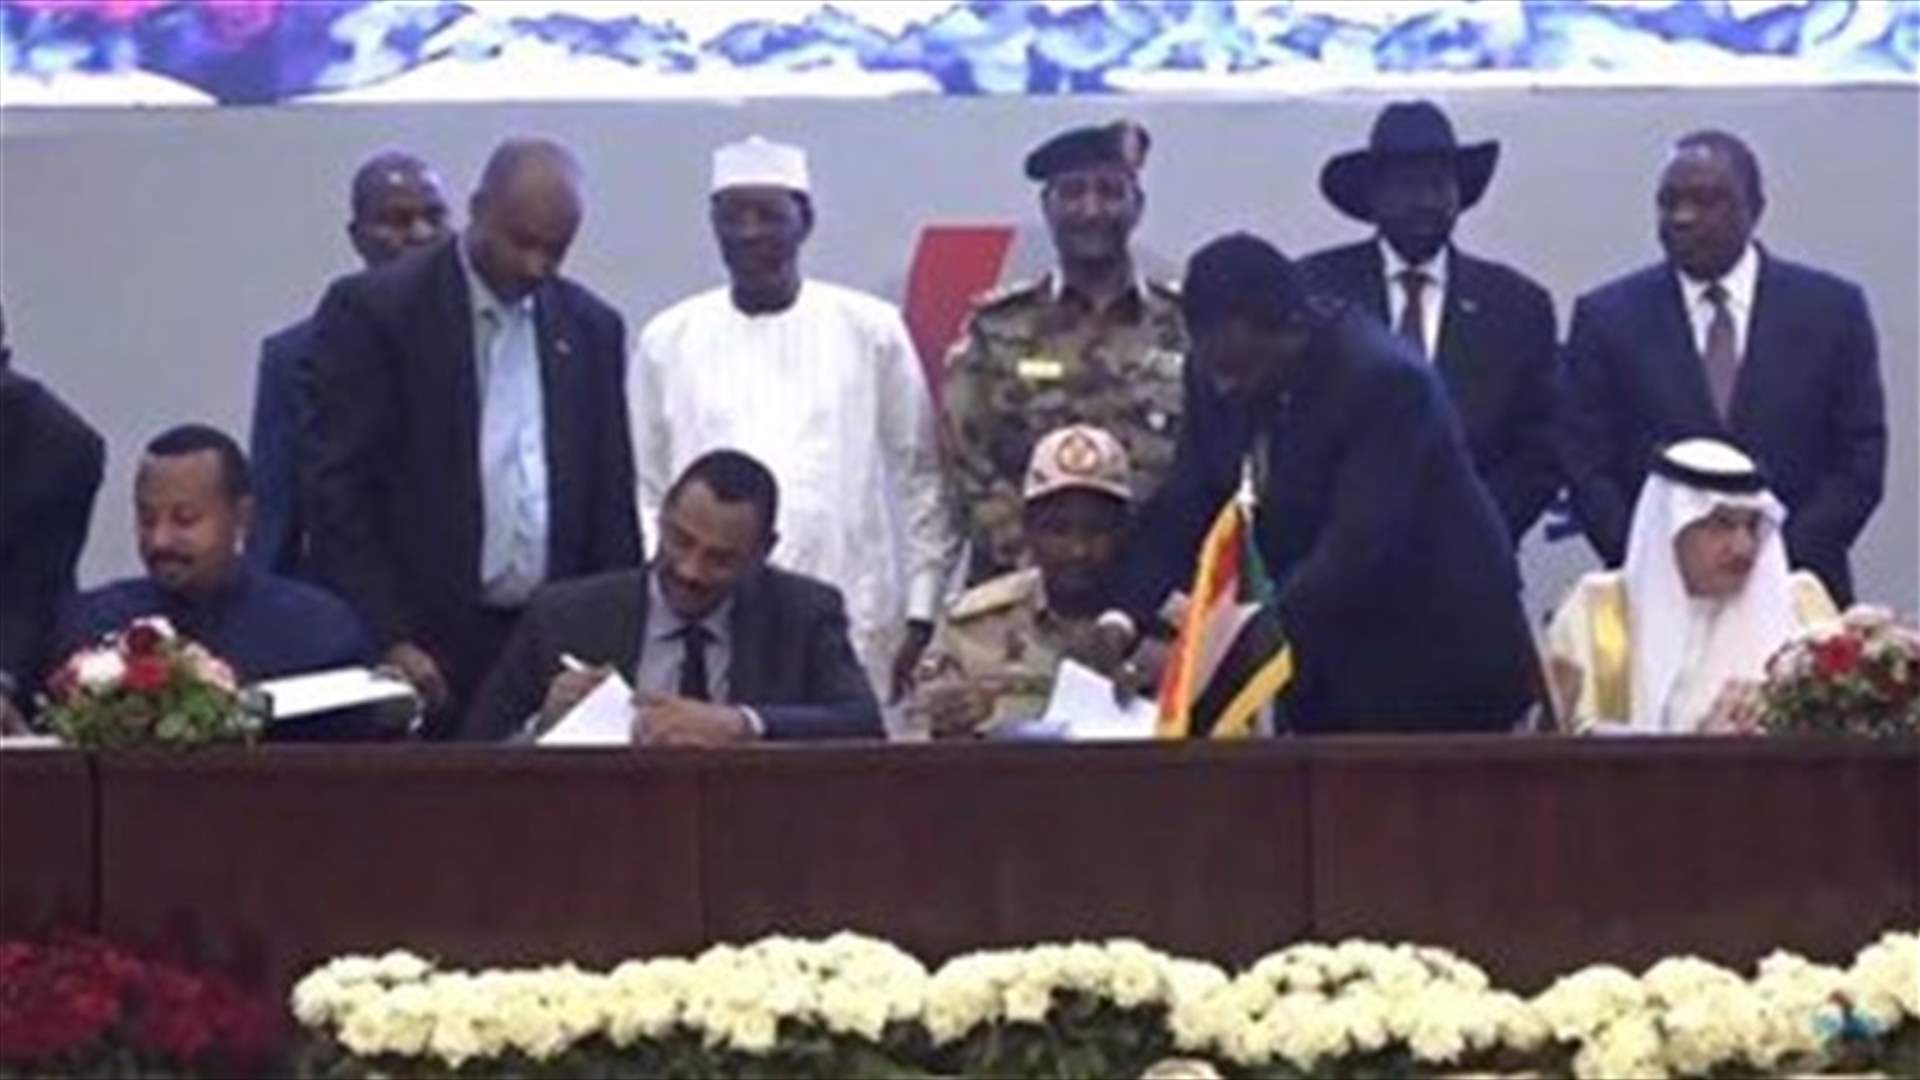 Sudan opposition coalition appoints five civilian members of sovereign council